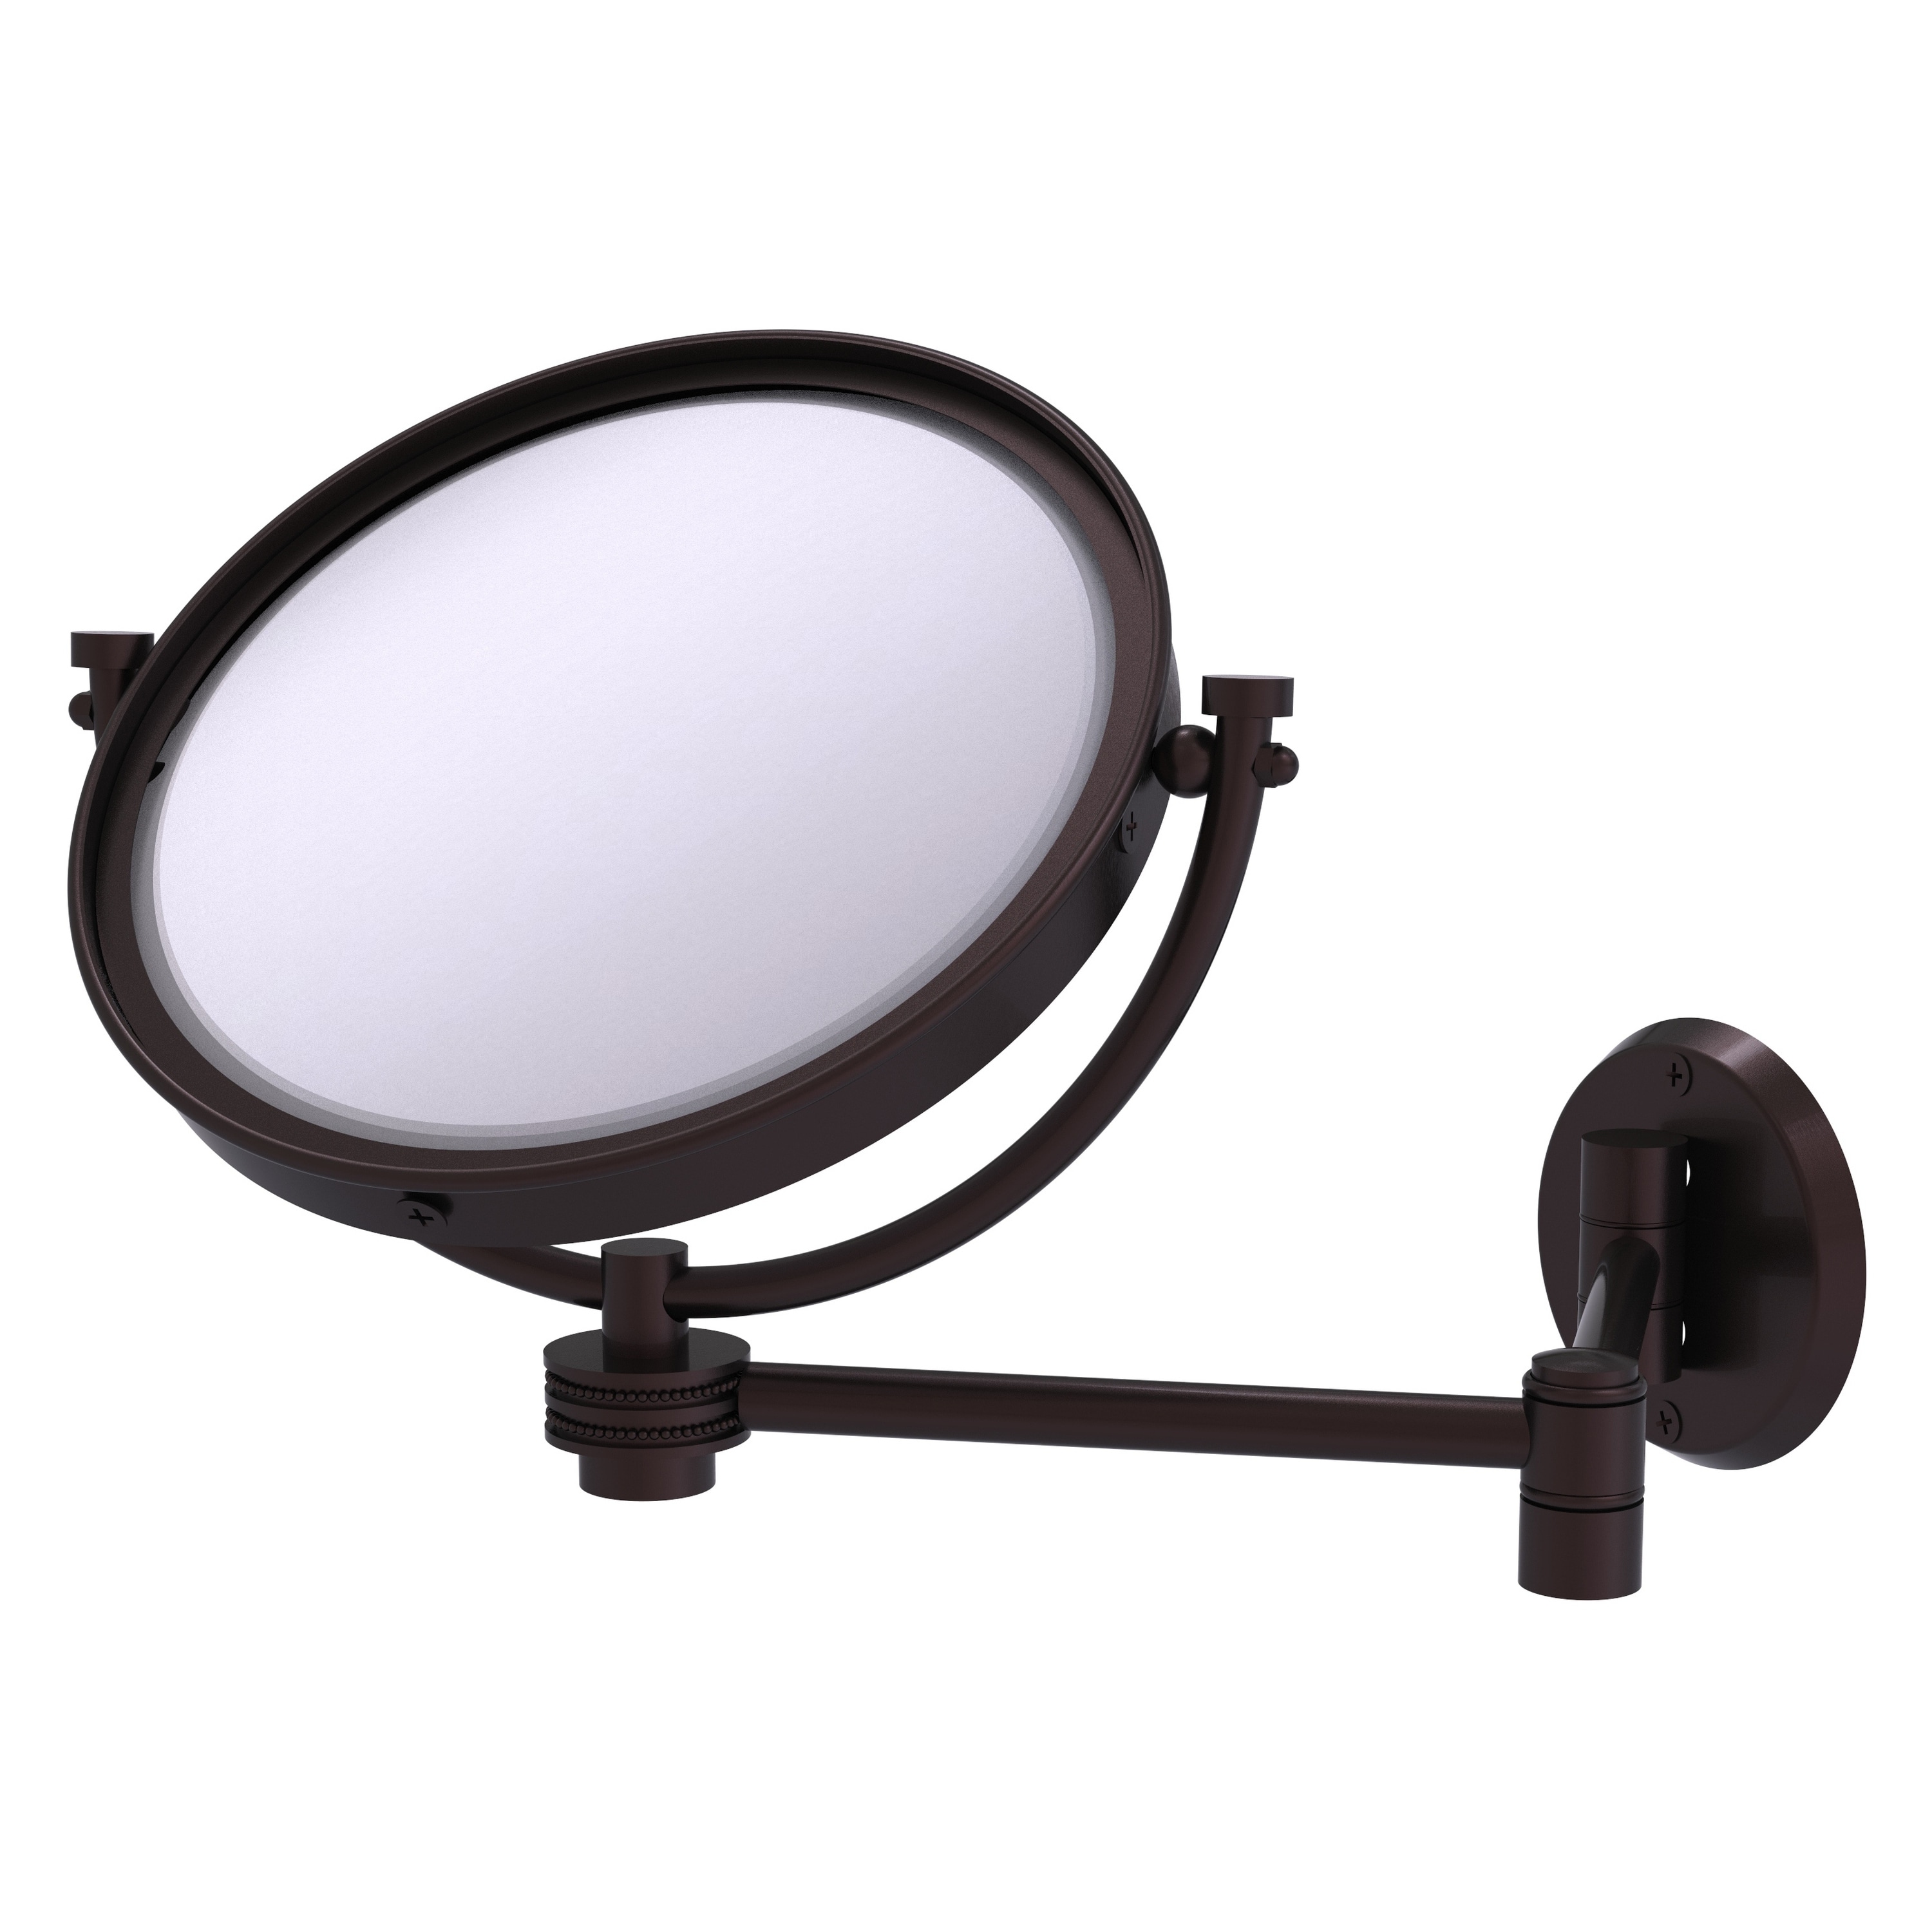 8-in x 10-in Antique Brown Double-sided 2X Magnifying Wall-mounted Vanity Mirror | - Allied Brass WM-6D/2X-ABZ